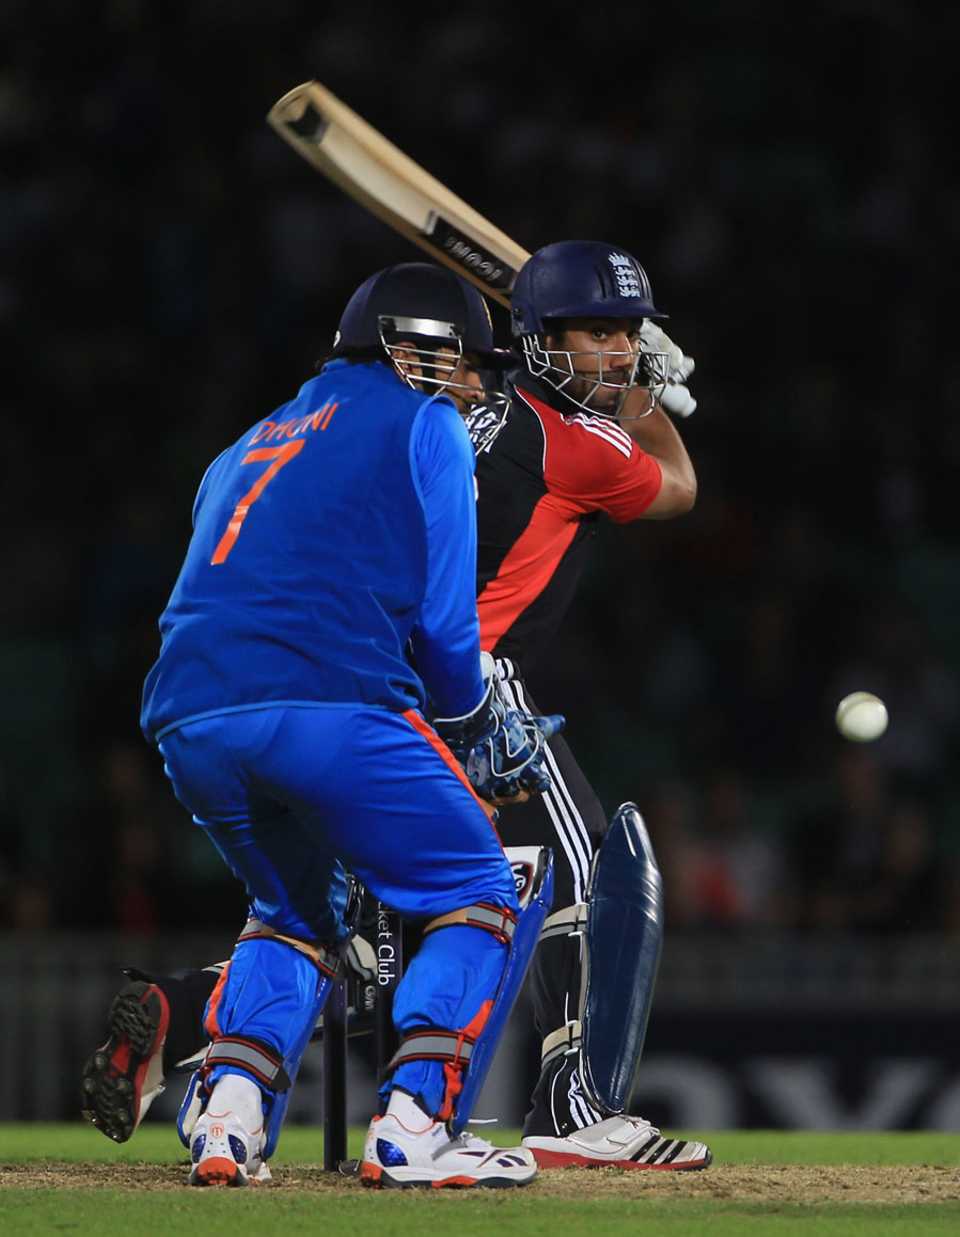 Ravi Bopara anchored England's chase with 40 from 41 deliveries